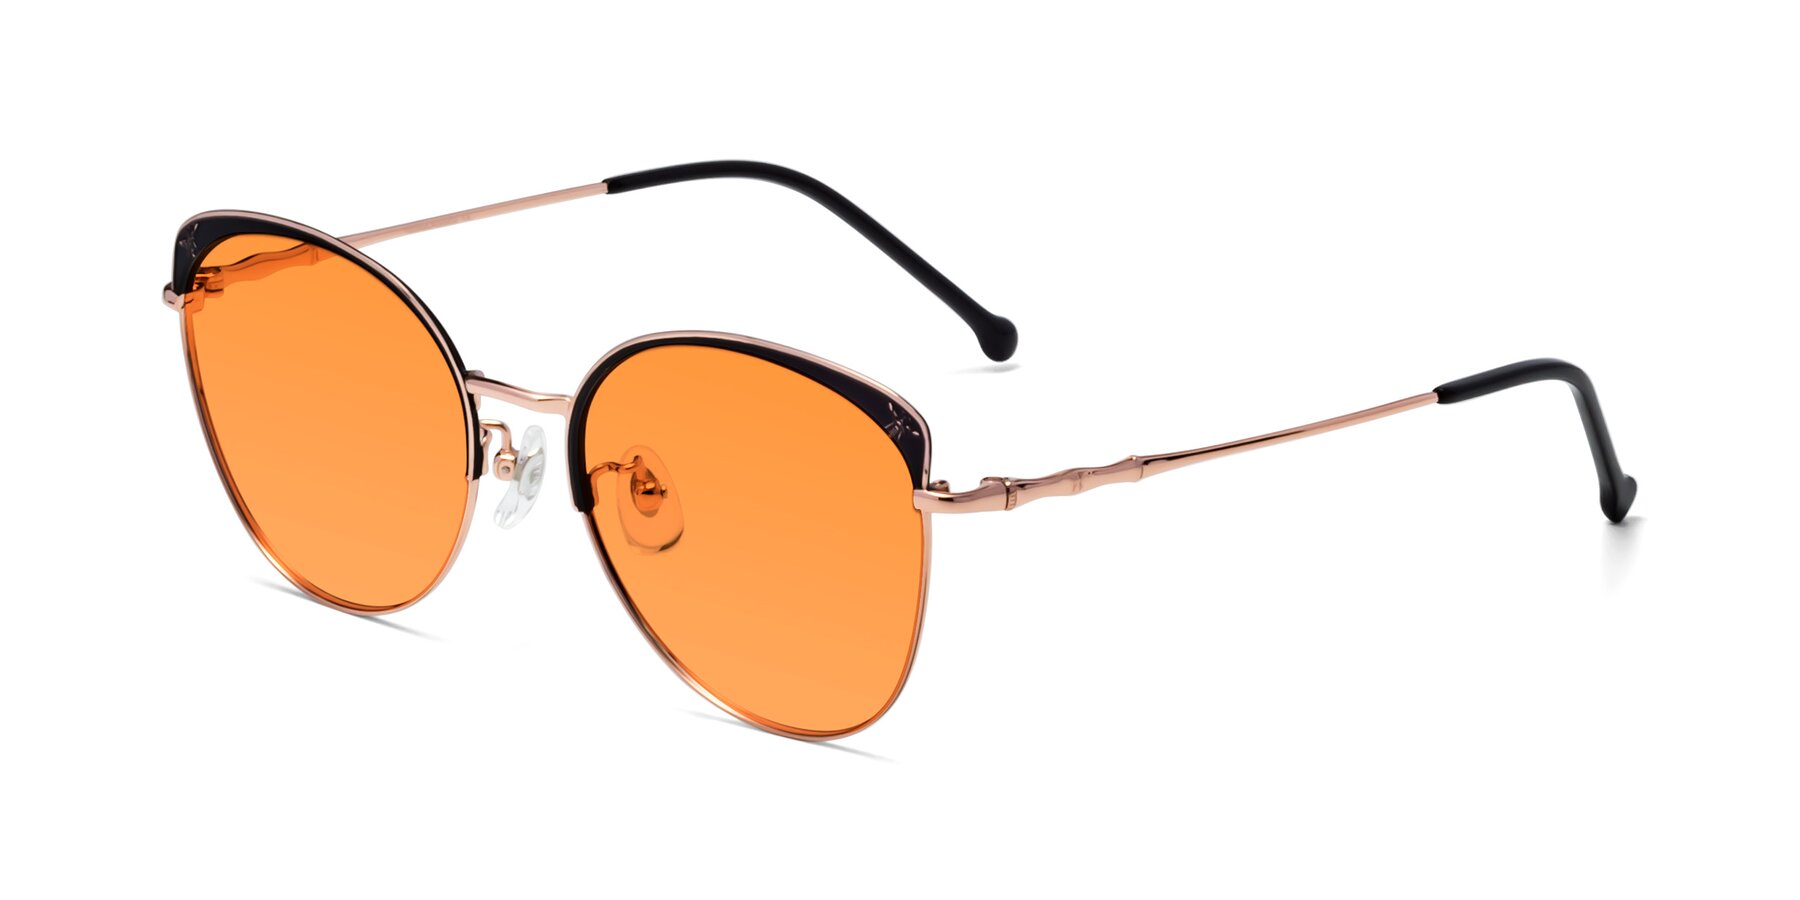 Angle of 18019 in Black-Rose Gold with Orange Tinted Lenses